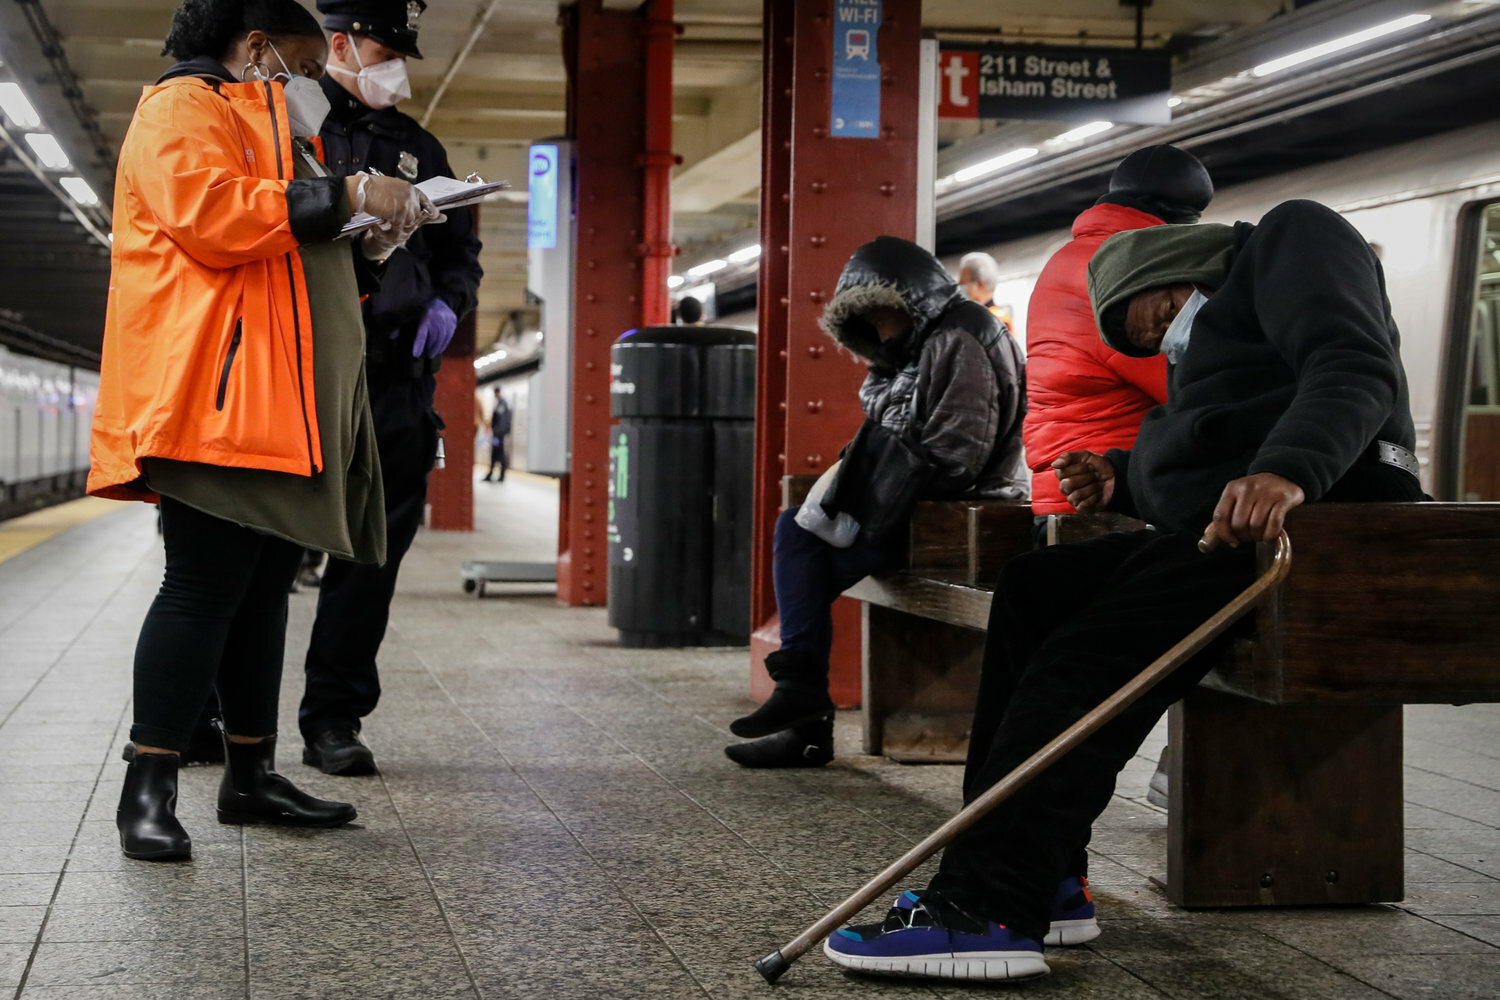 A homeless outreach worker and an NYPD officer assisted passengers found sleeping on subway cars at the 207th Street A train station in Inwood. Mayor Eric Adams last year directed first responders to intervene more aggressively to help people in need of mental health treatment.